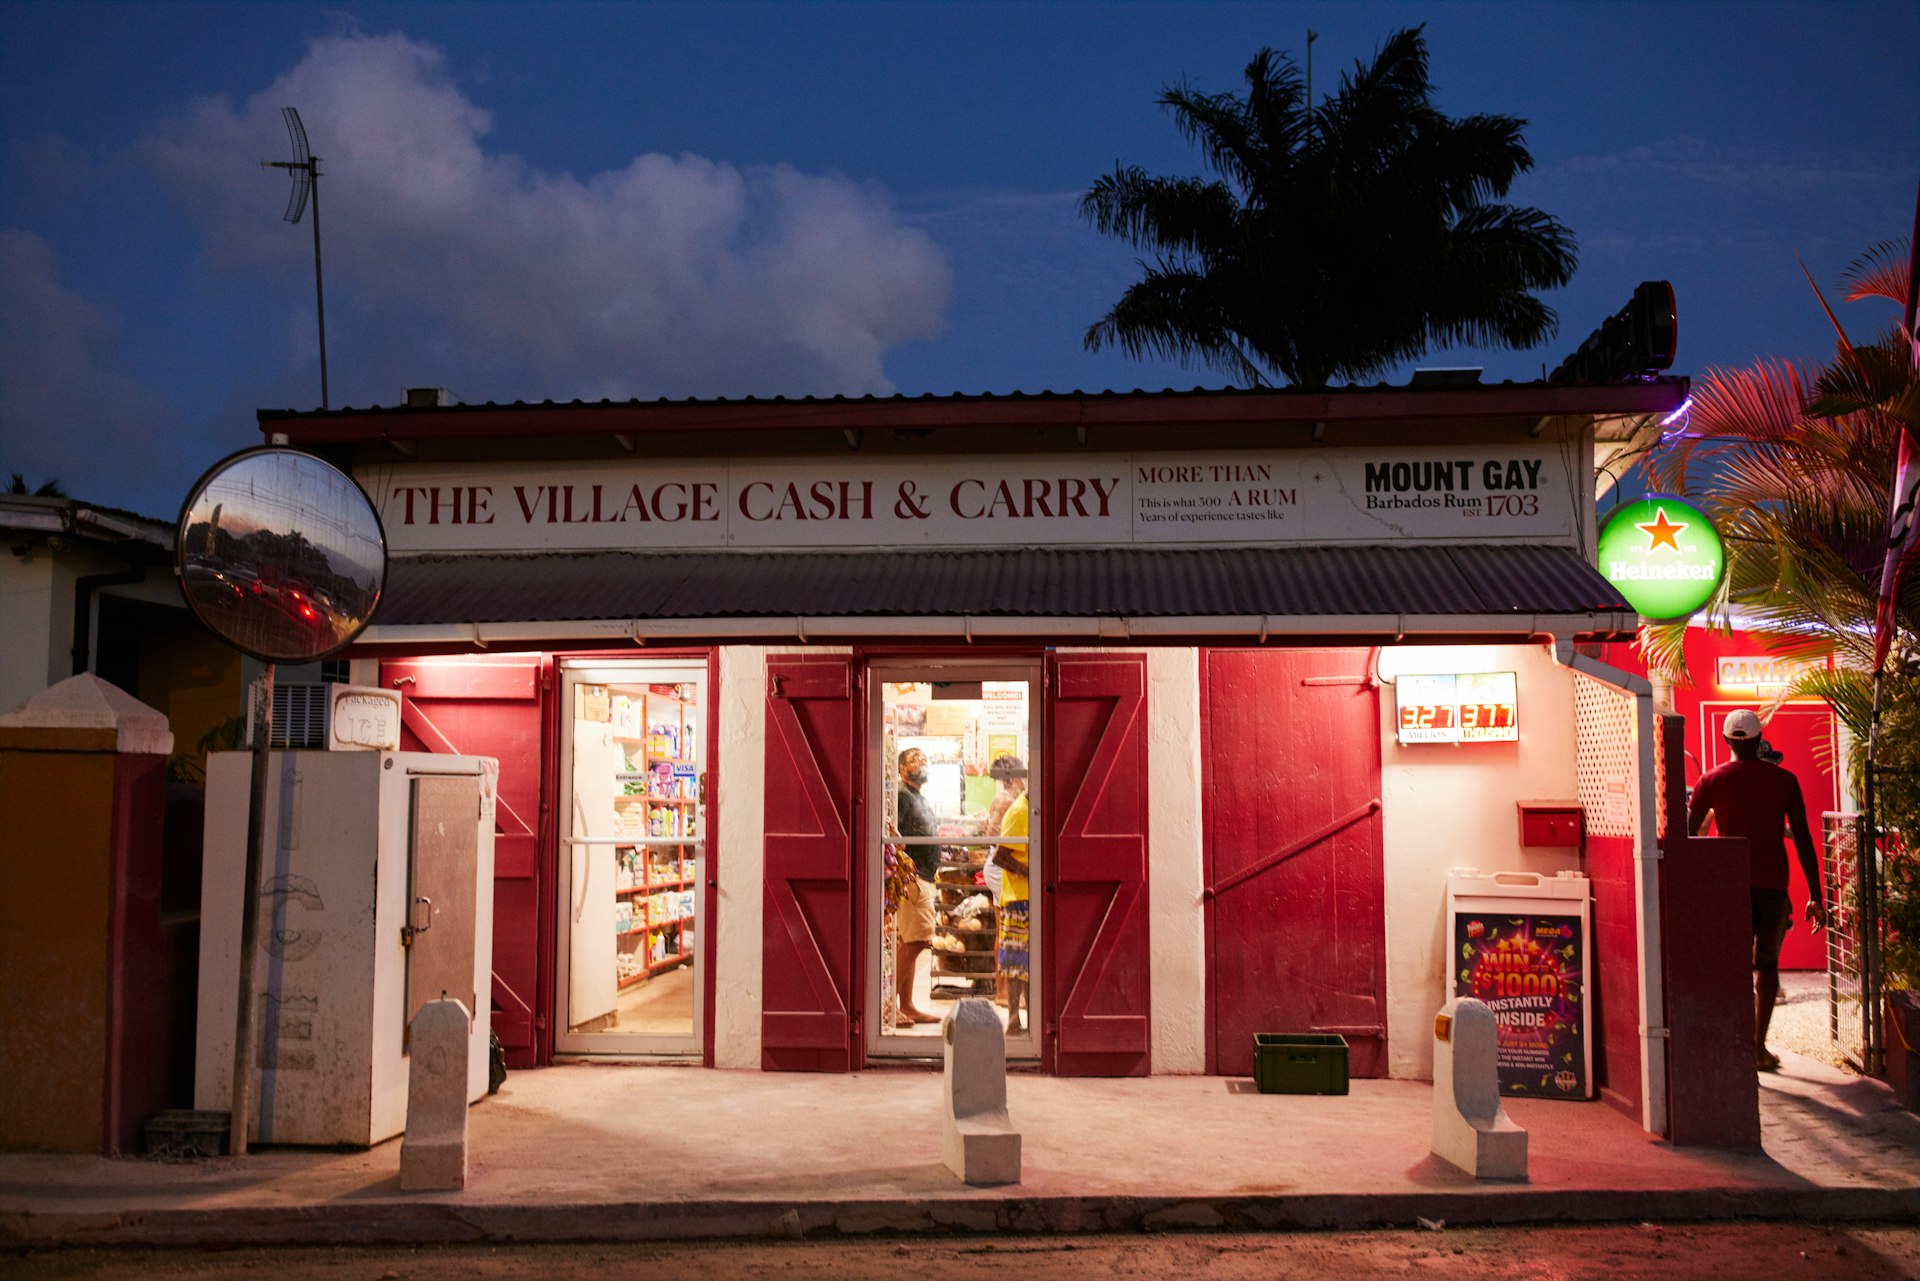 The exterior of a rum shop at night; the sign says "the Village Cash and Carry"